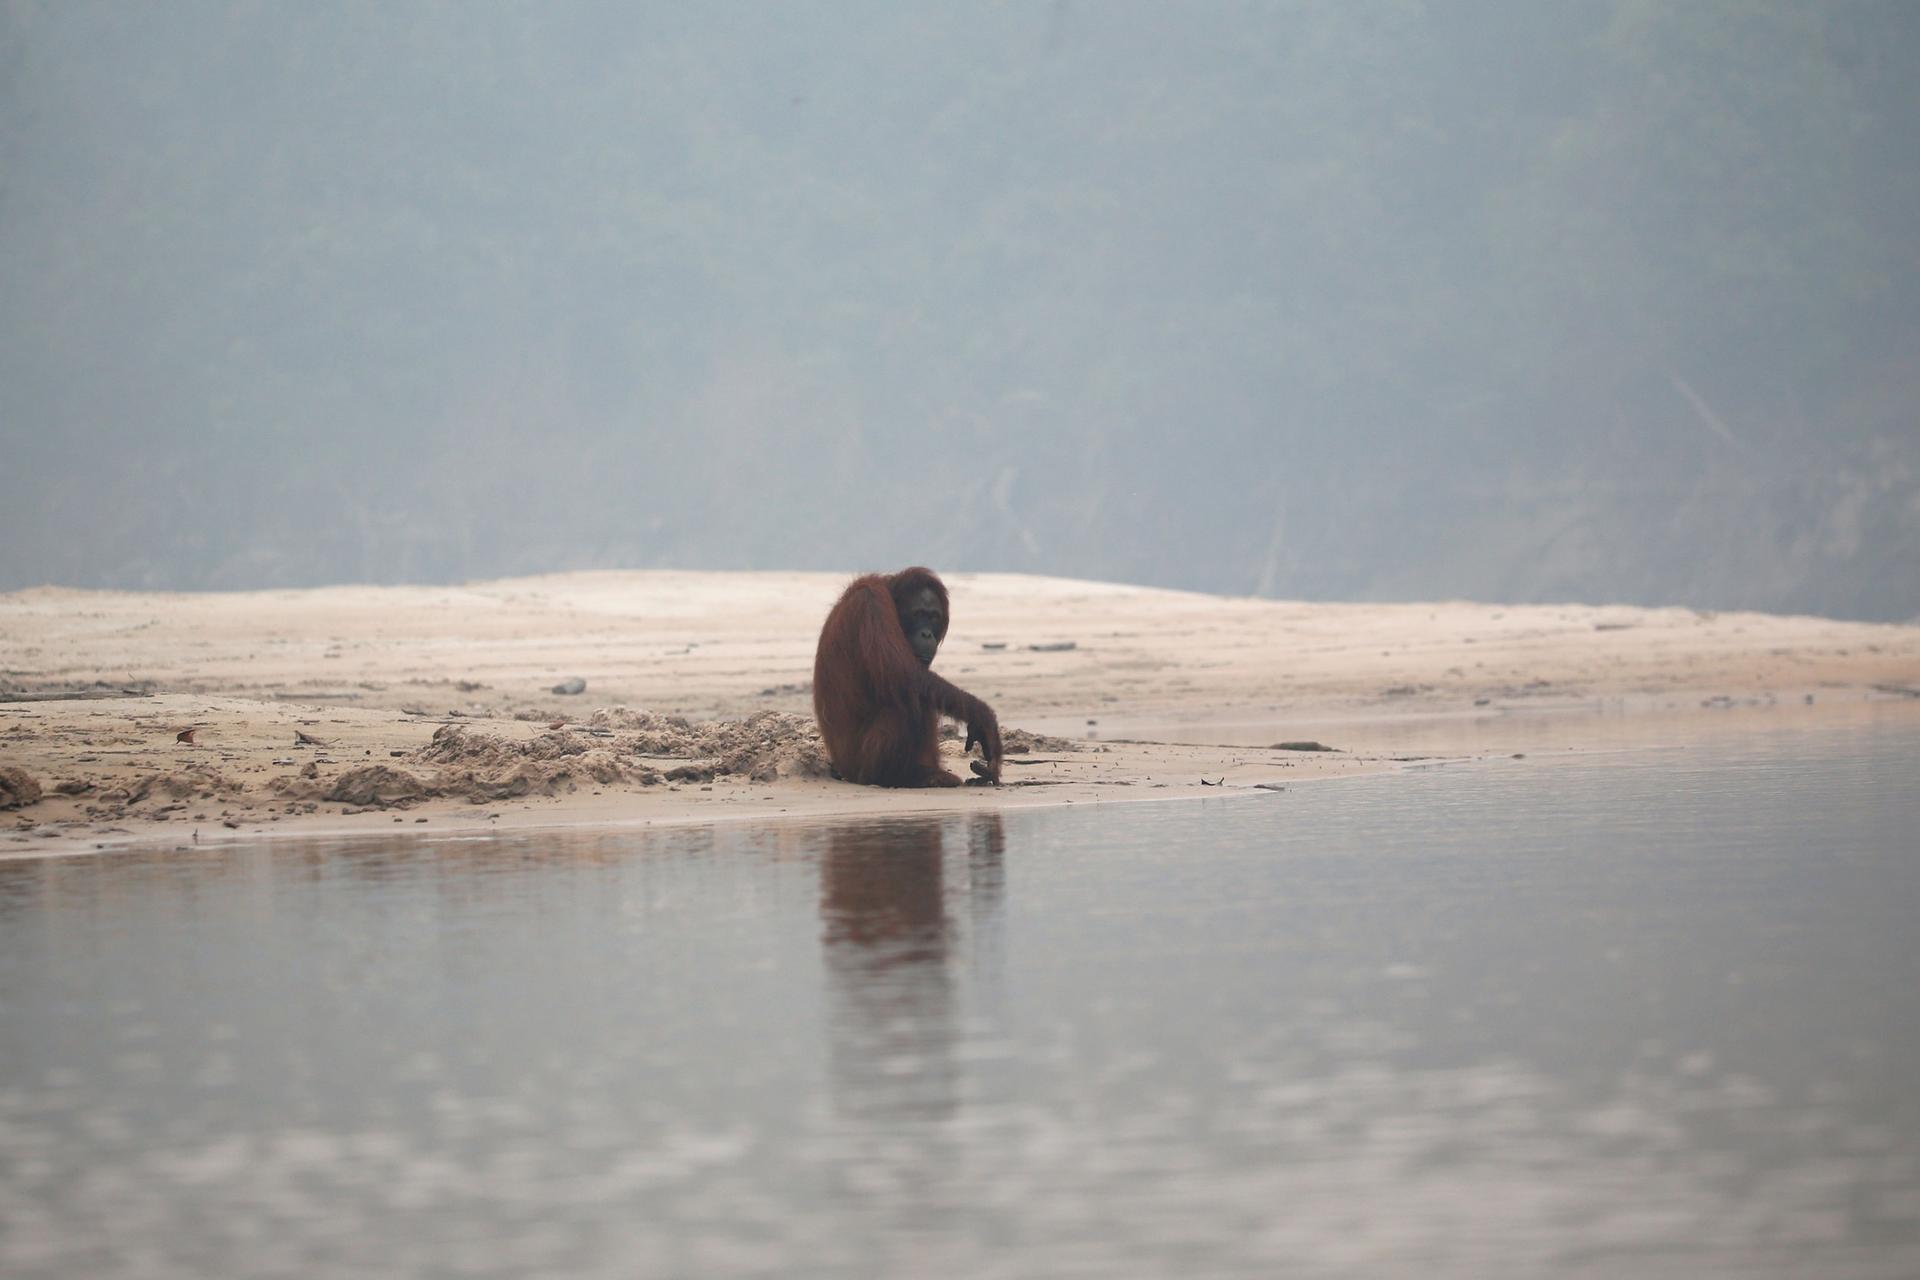 An orangutan is shown sitting on the edge of a beach with smoke clouding the background.